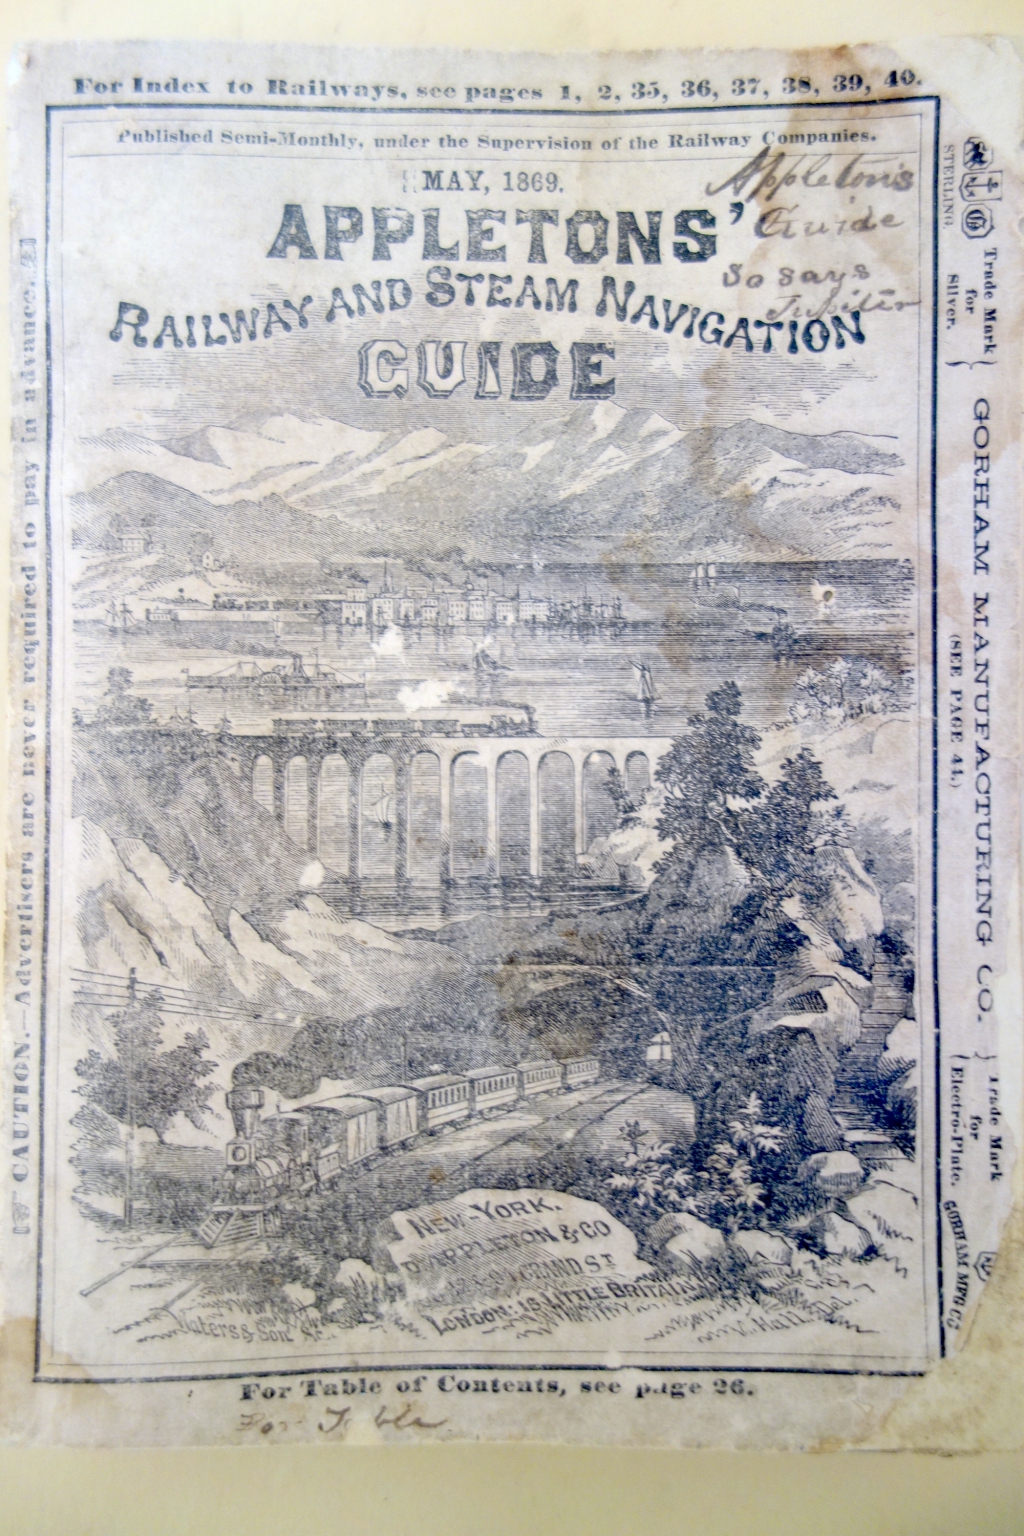 Appleton's Railway and Steam Navigation Guide